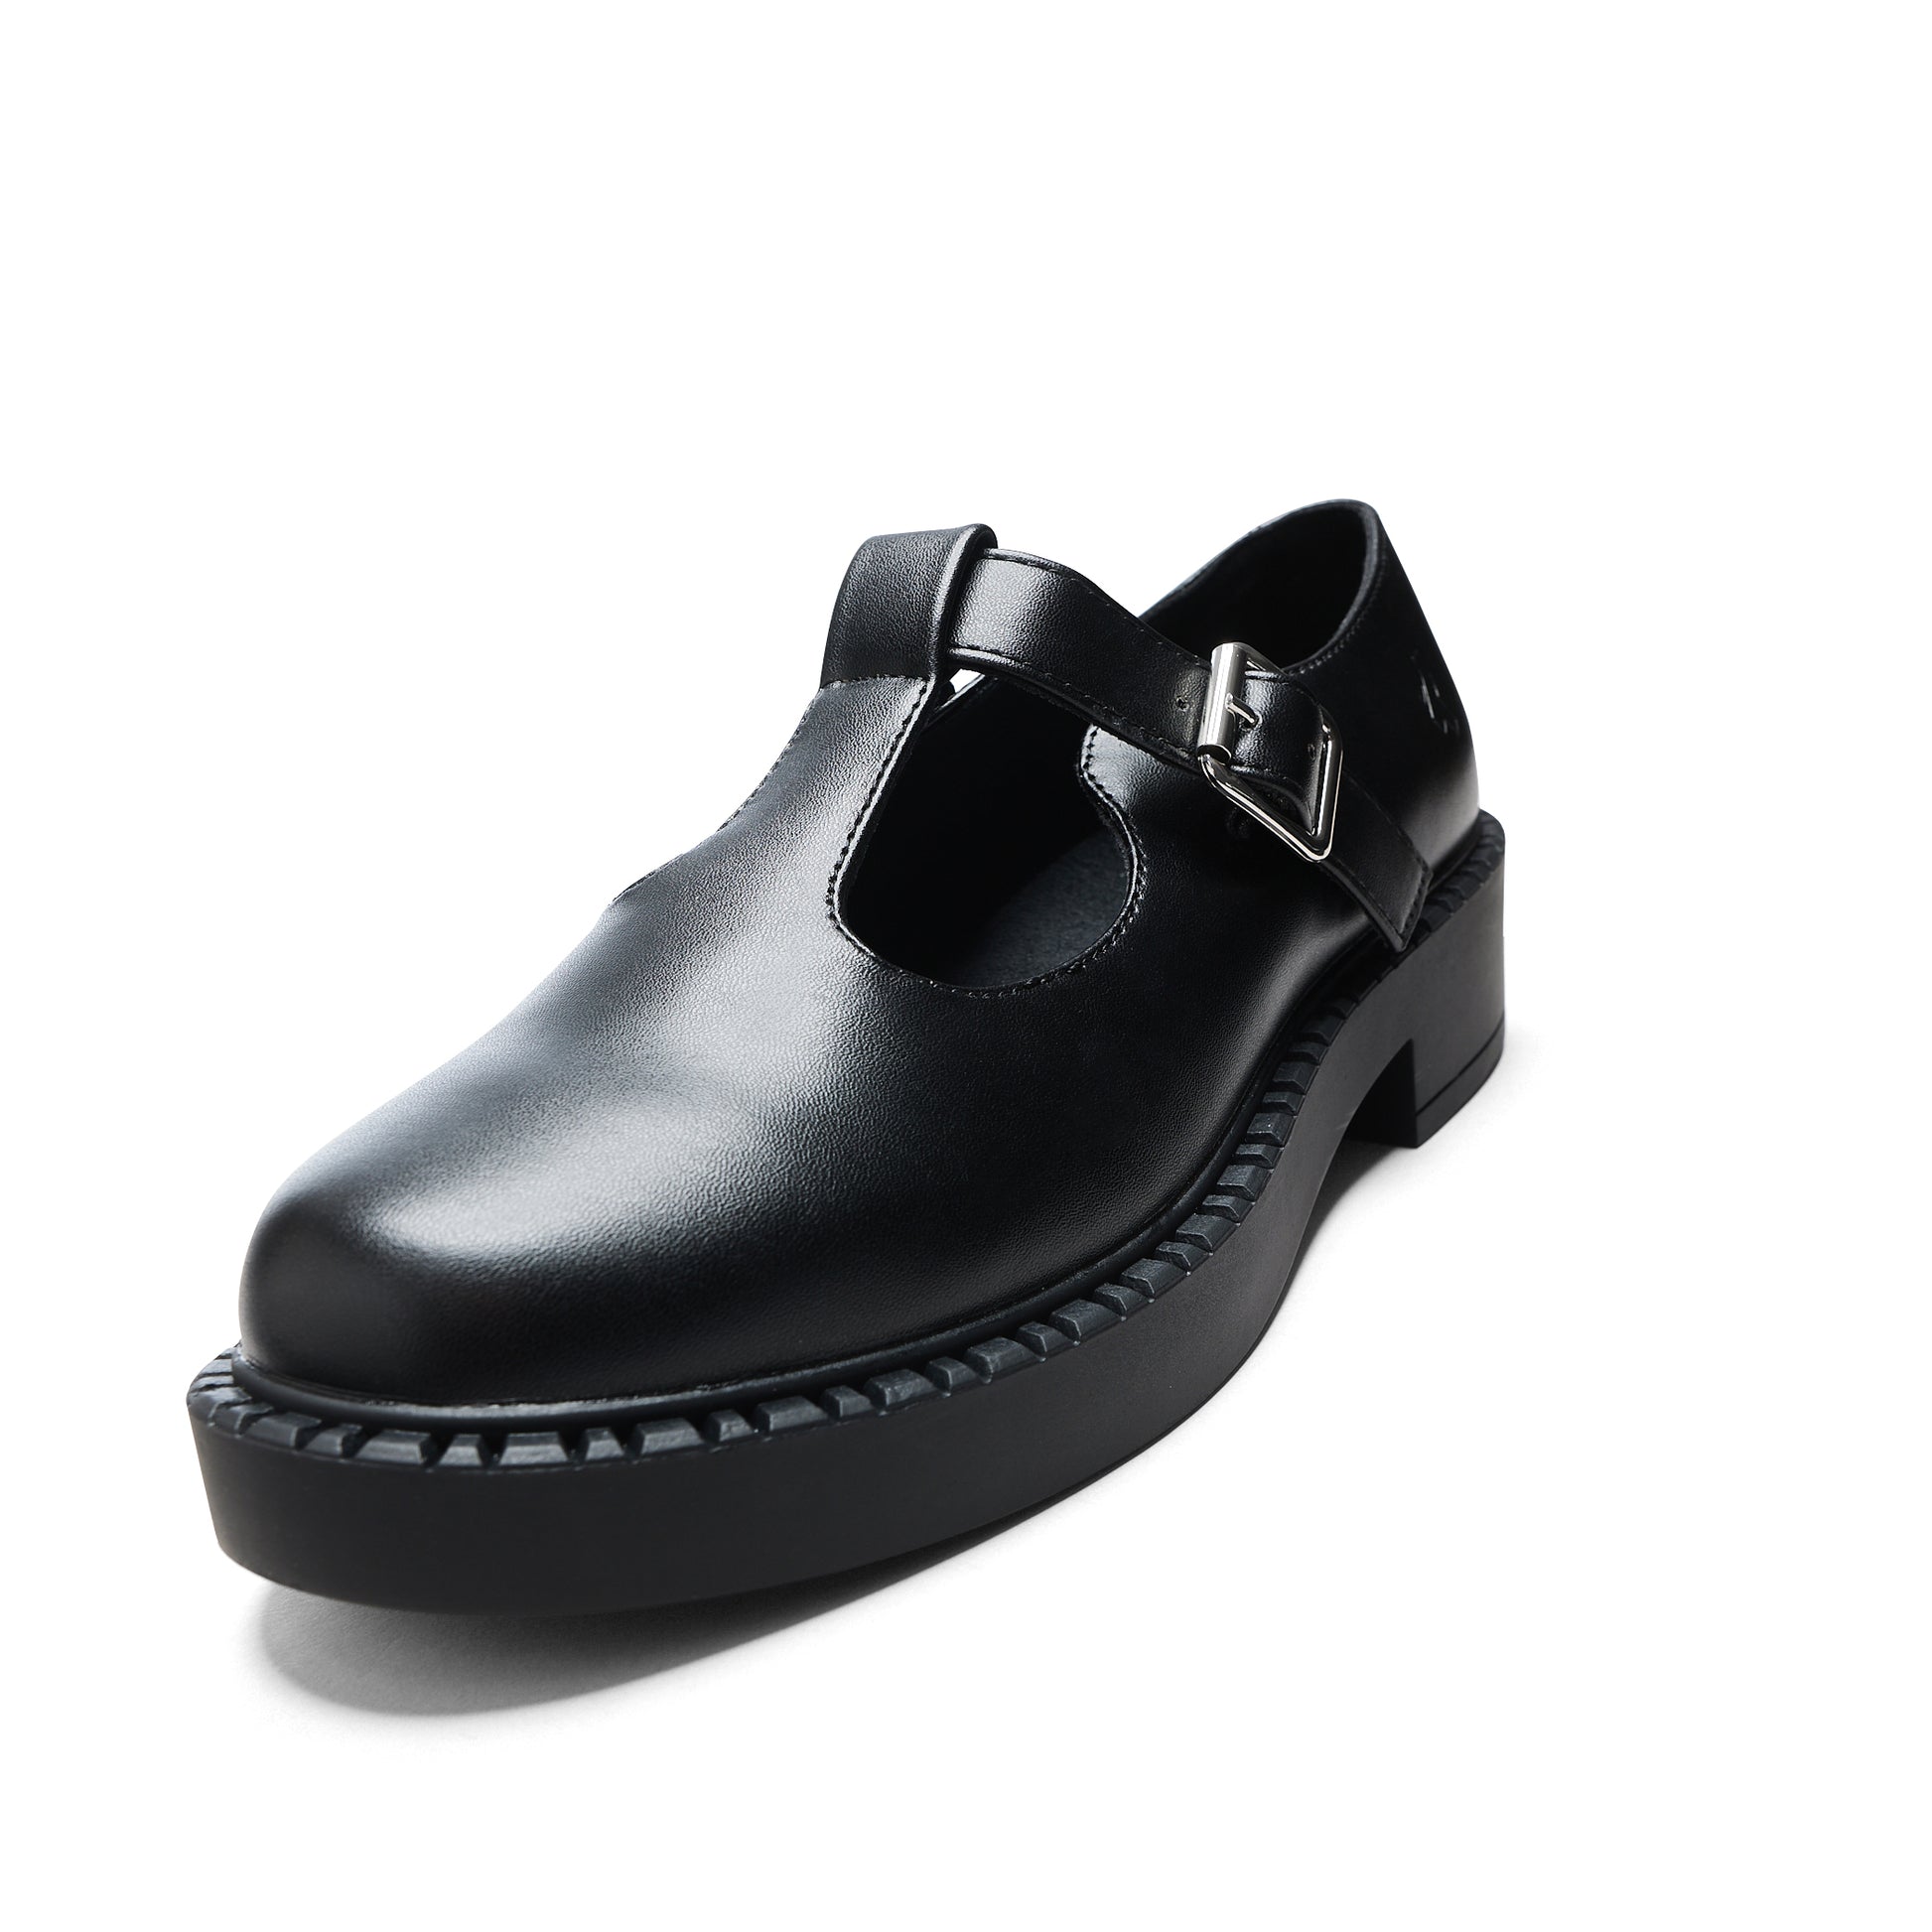 Simido Tale Mary Janes - Mary Janes - KOI Footwear - Black - Front Detail